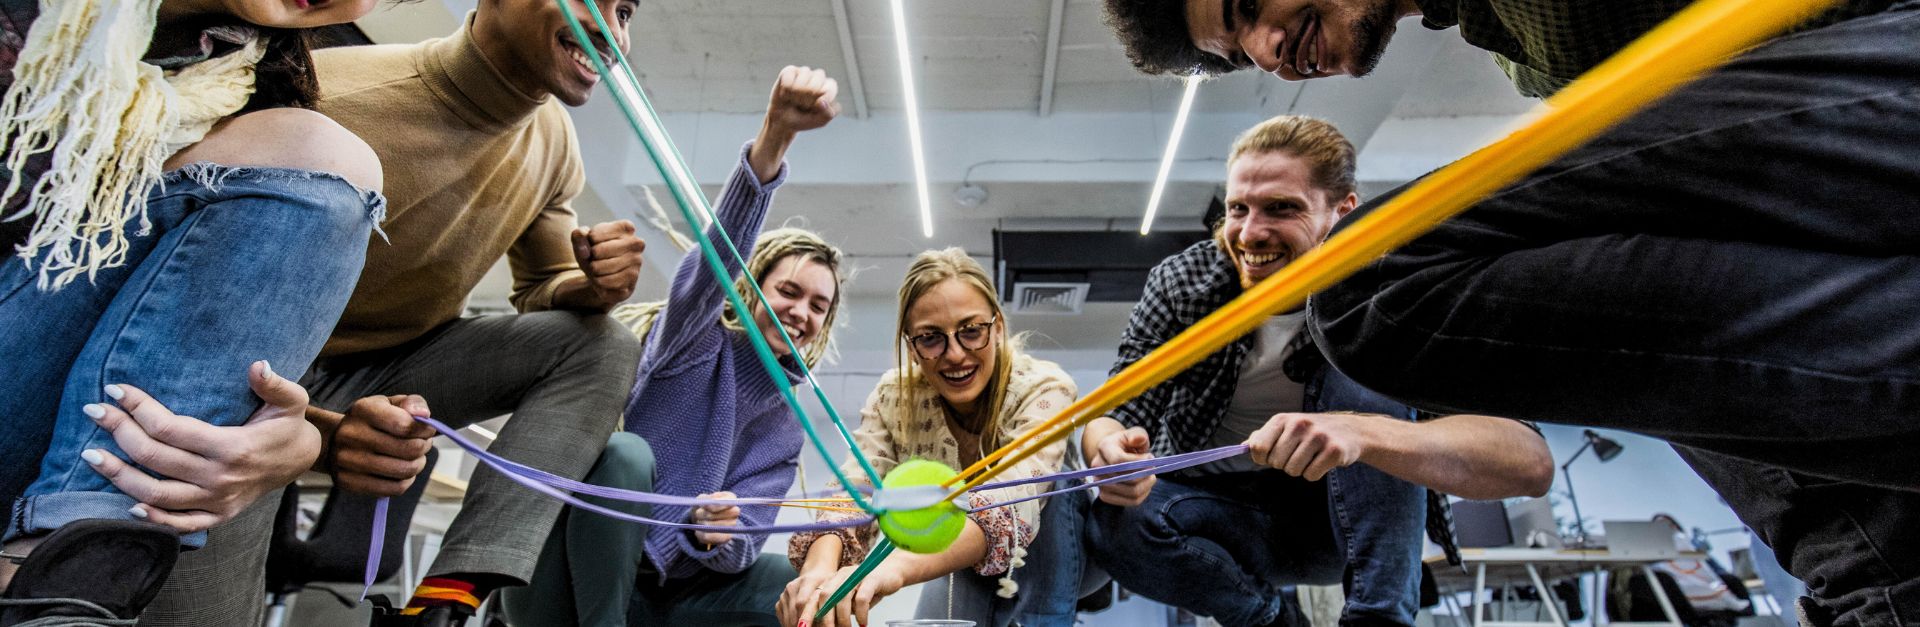 Team Building Activities: 5 Fun and Effective Ways to Build Trust and Improve Collaboration